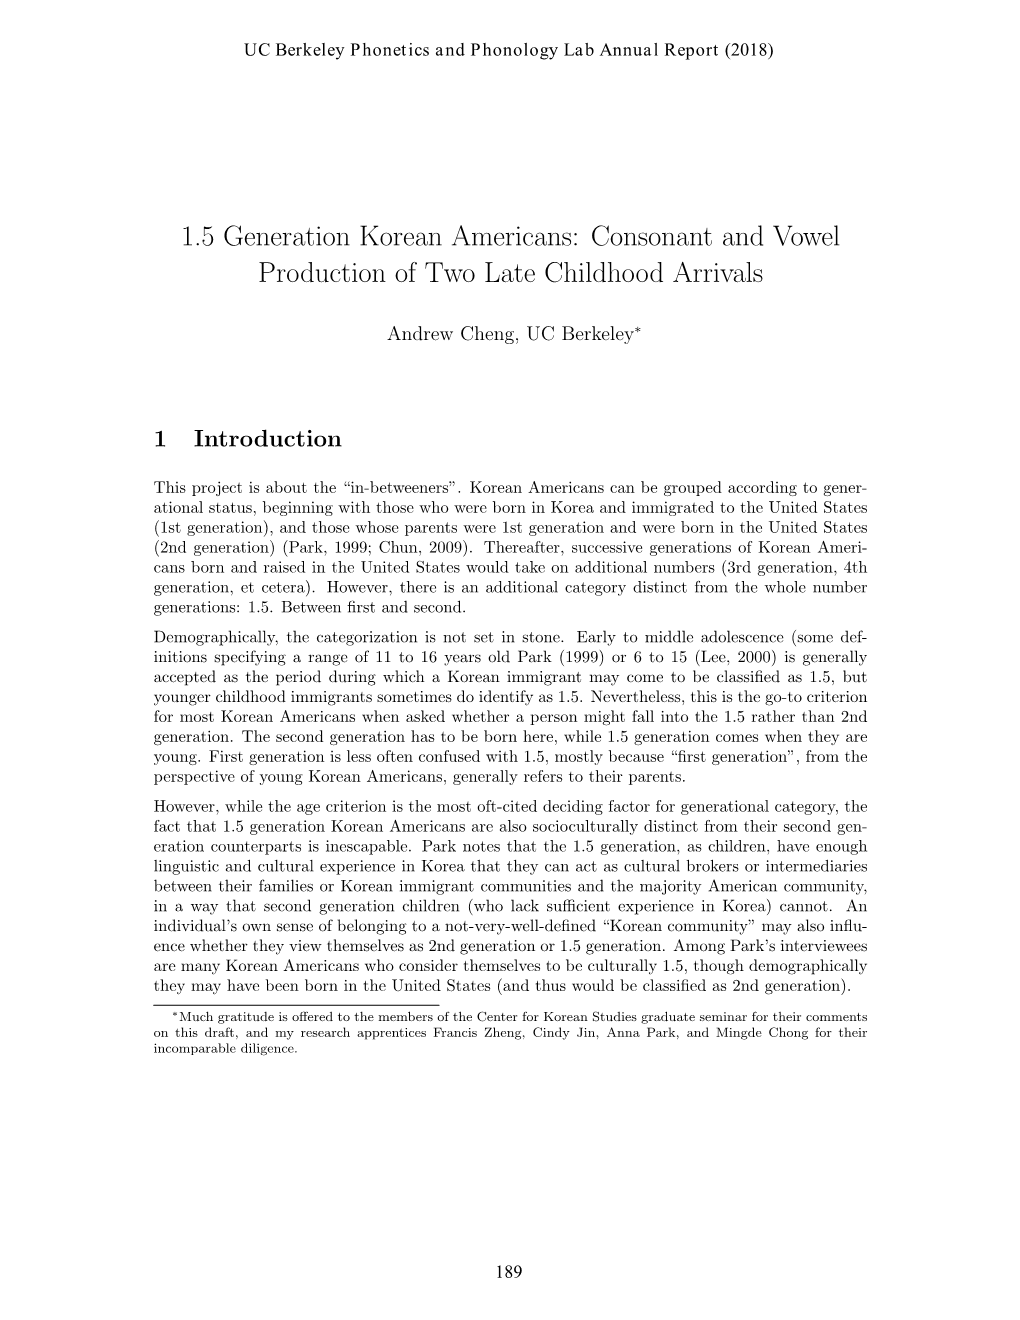 1.5 Generation Korean Americans: Consonant and Vowel Production of Two Late Childhood Arrivals